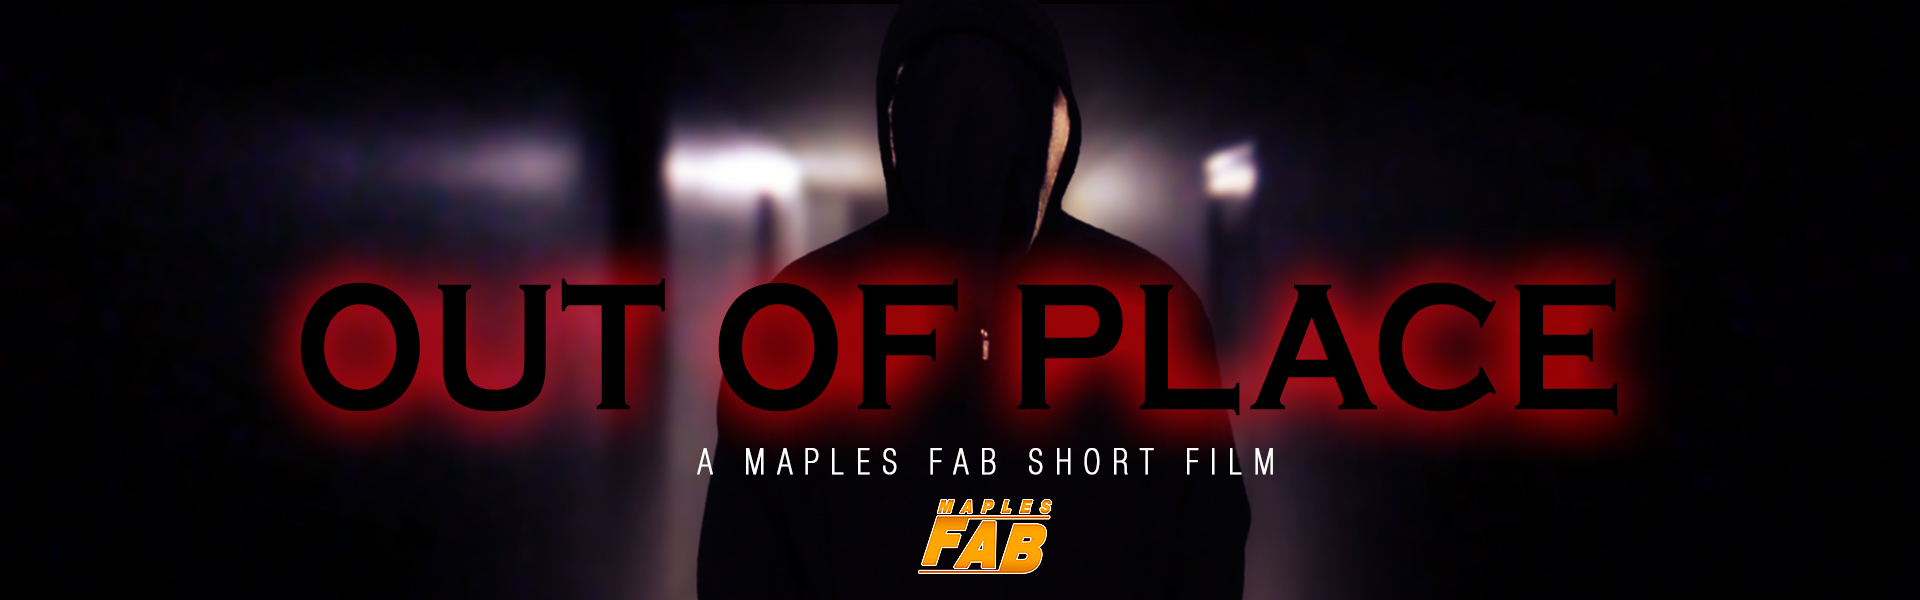 Out of Place - Maples FAB Short Film